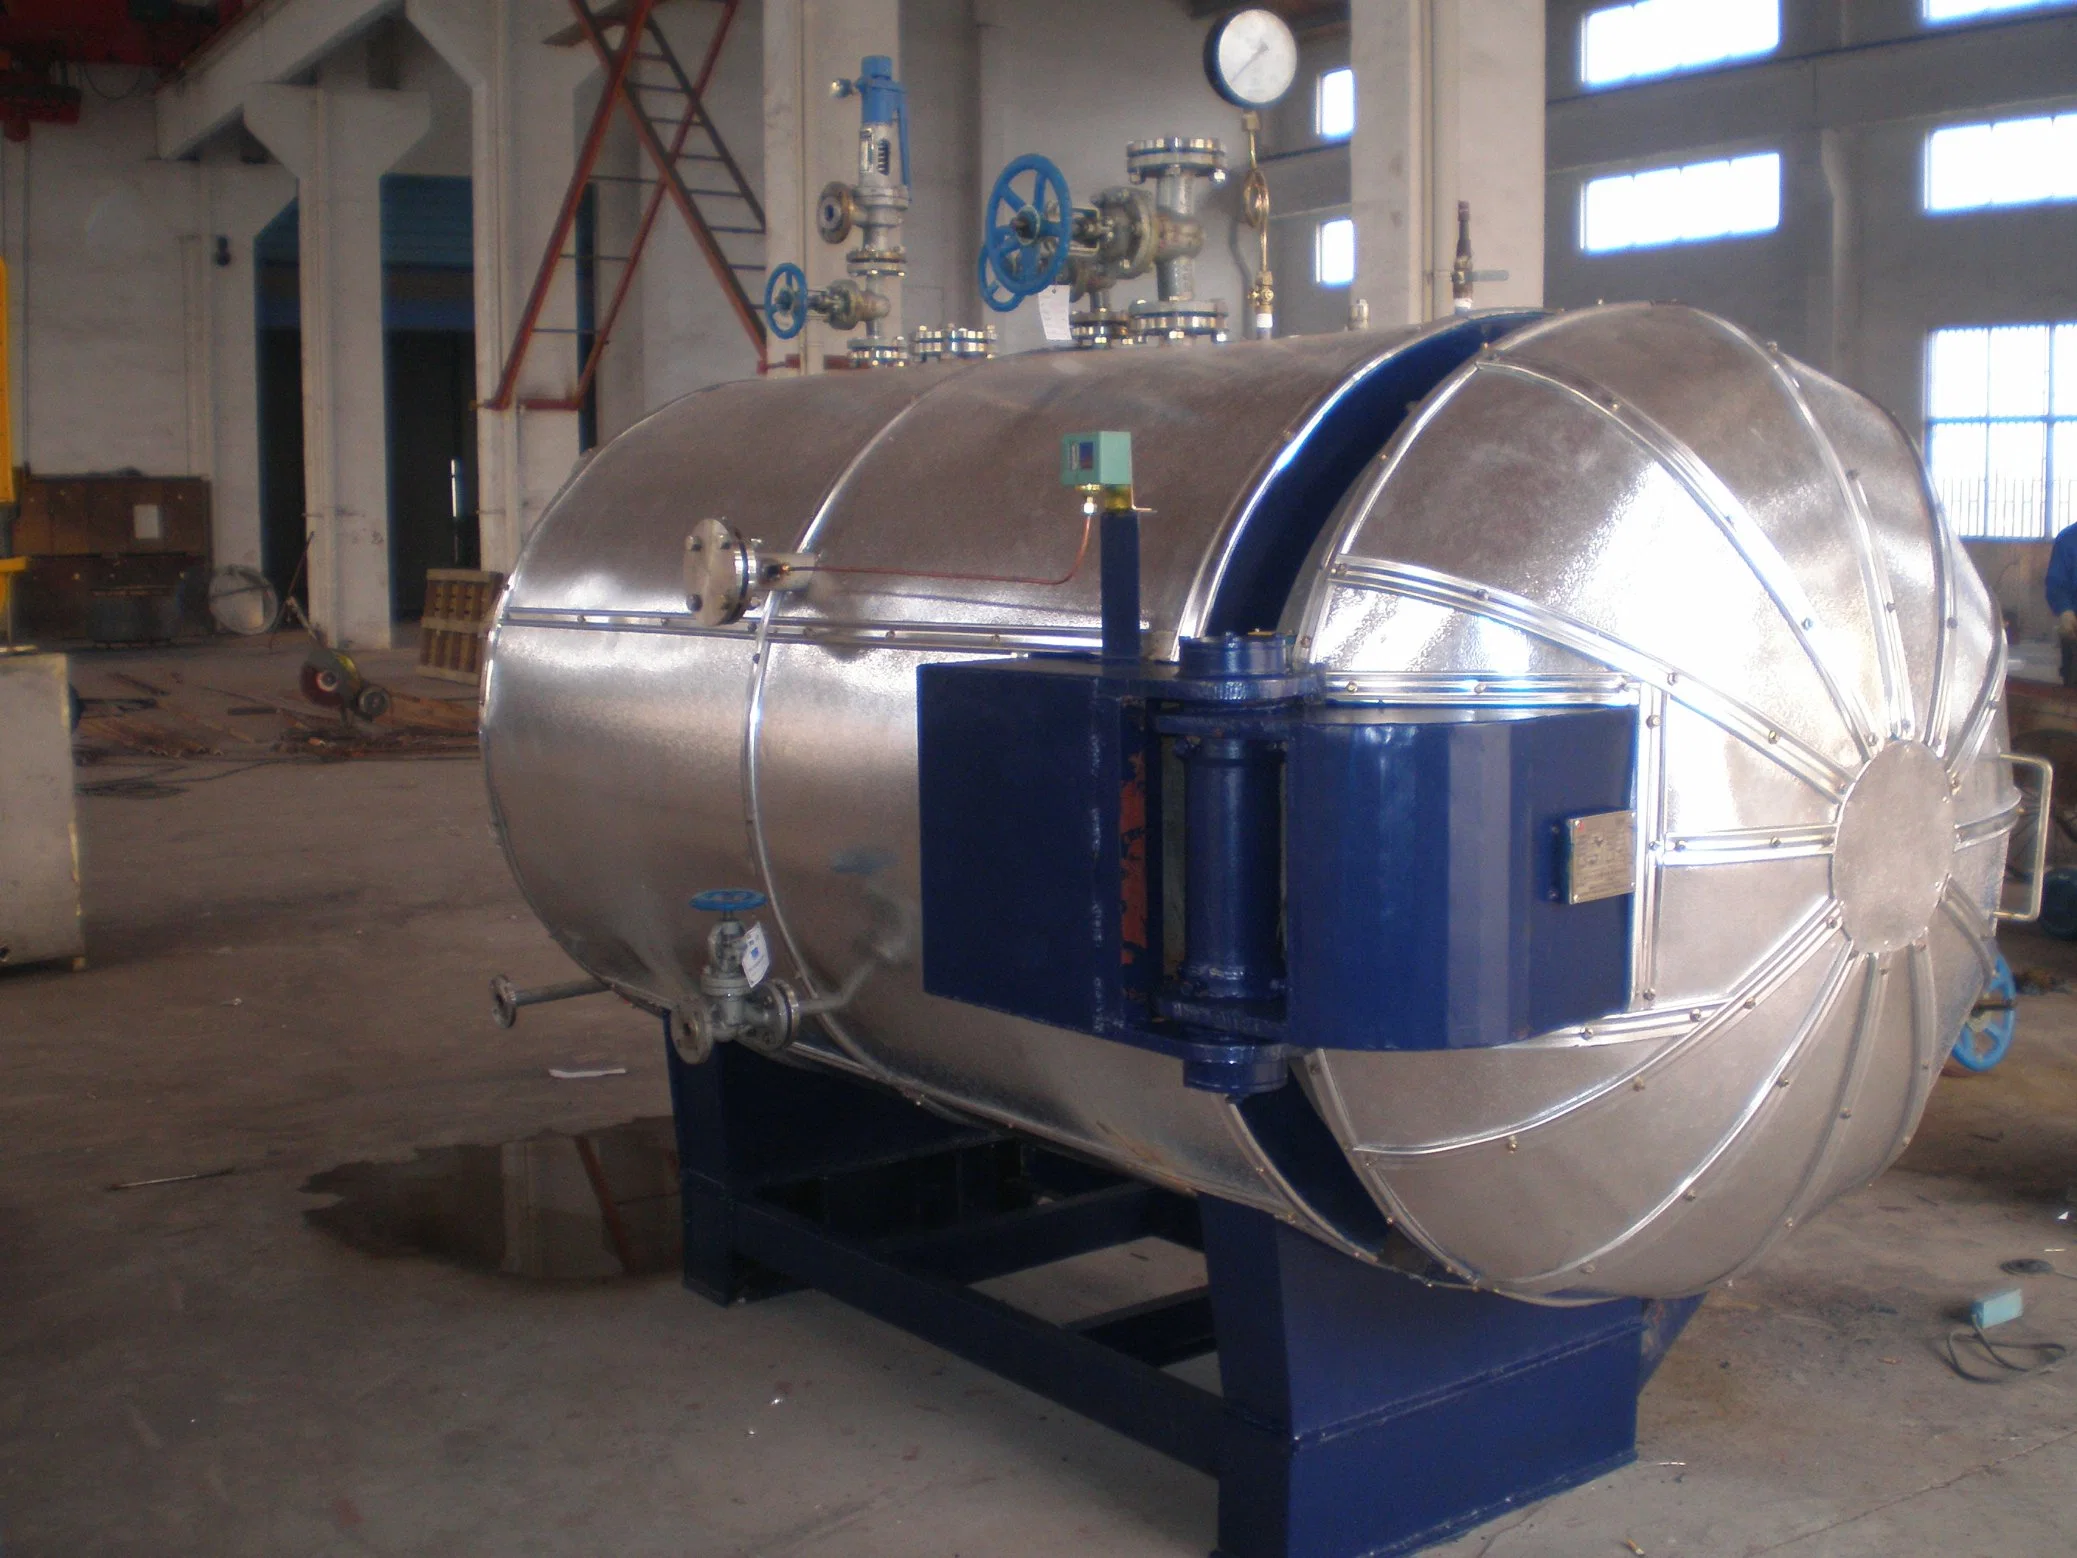 Fast Thermal Wood Dryer Machine Heat Treatment Drying Tank Kiln Cooking Cylinder